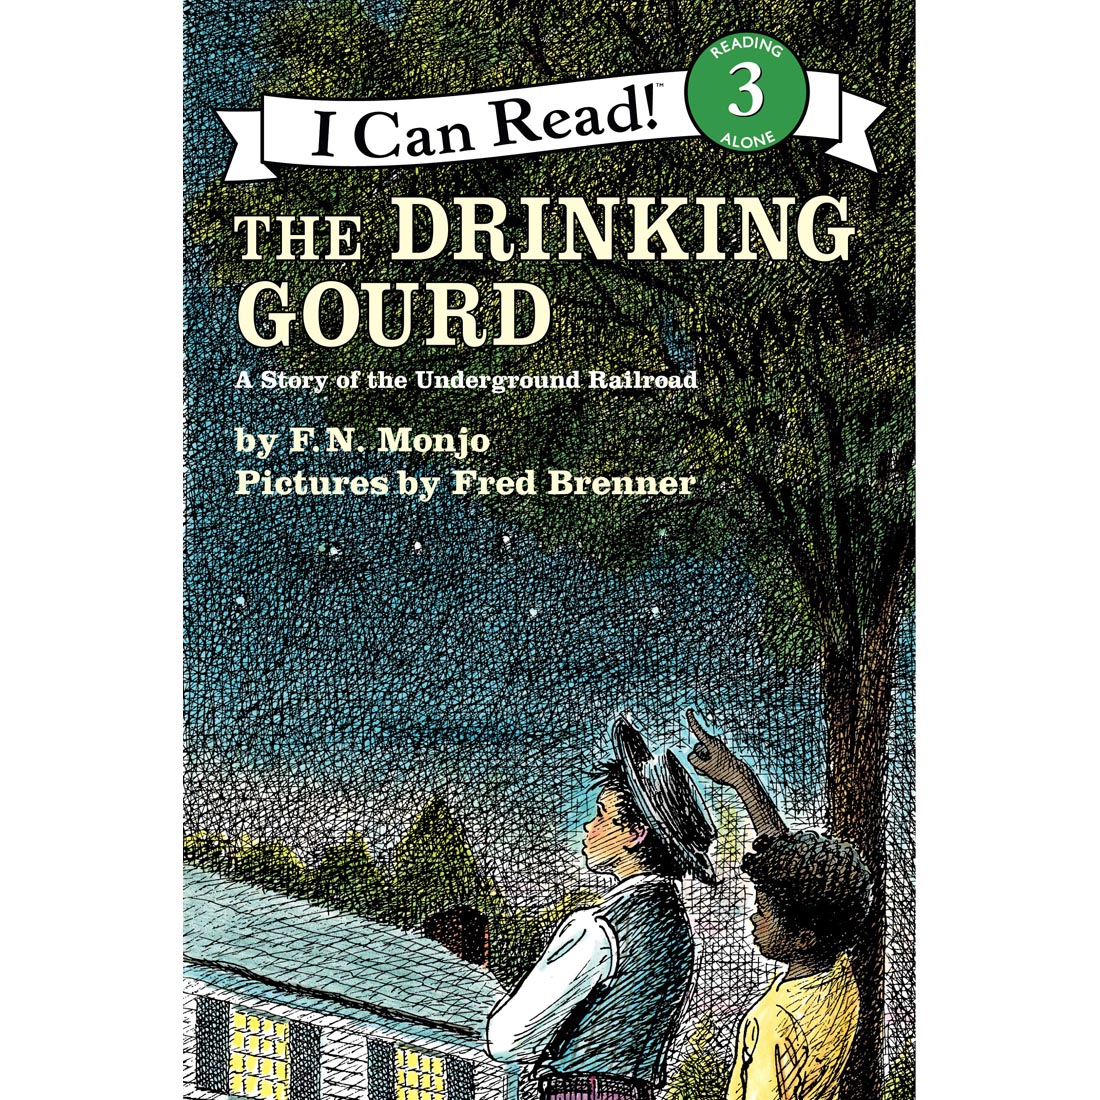 The Drinking Gourd A Story of the Underground Railroad- An I Can Read Book, Level 3